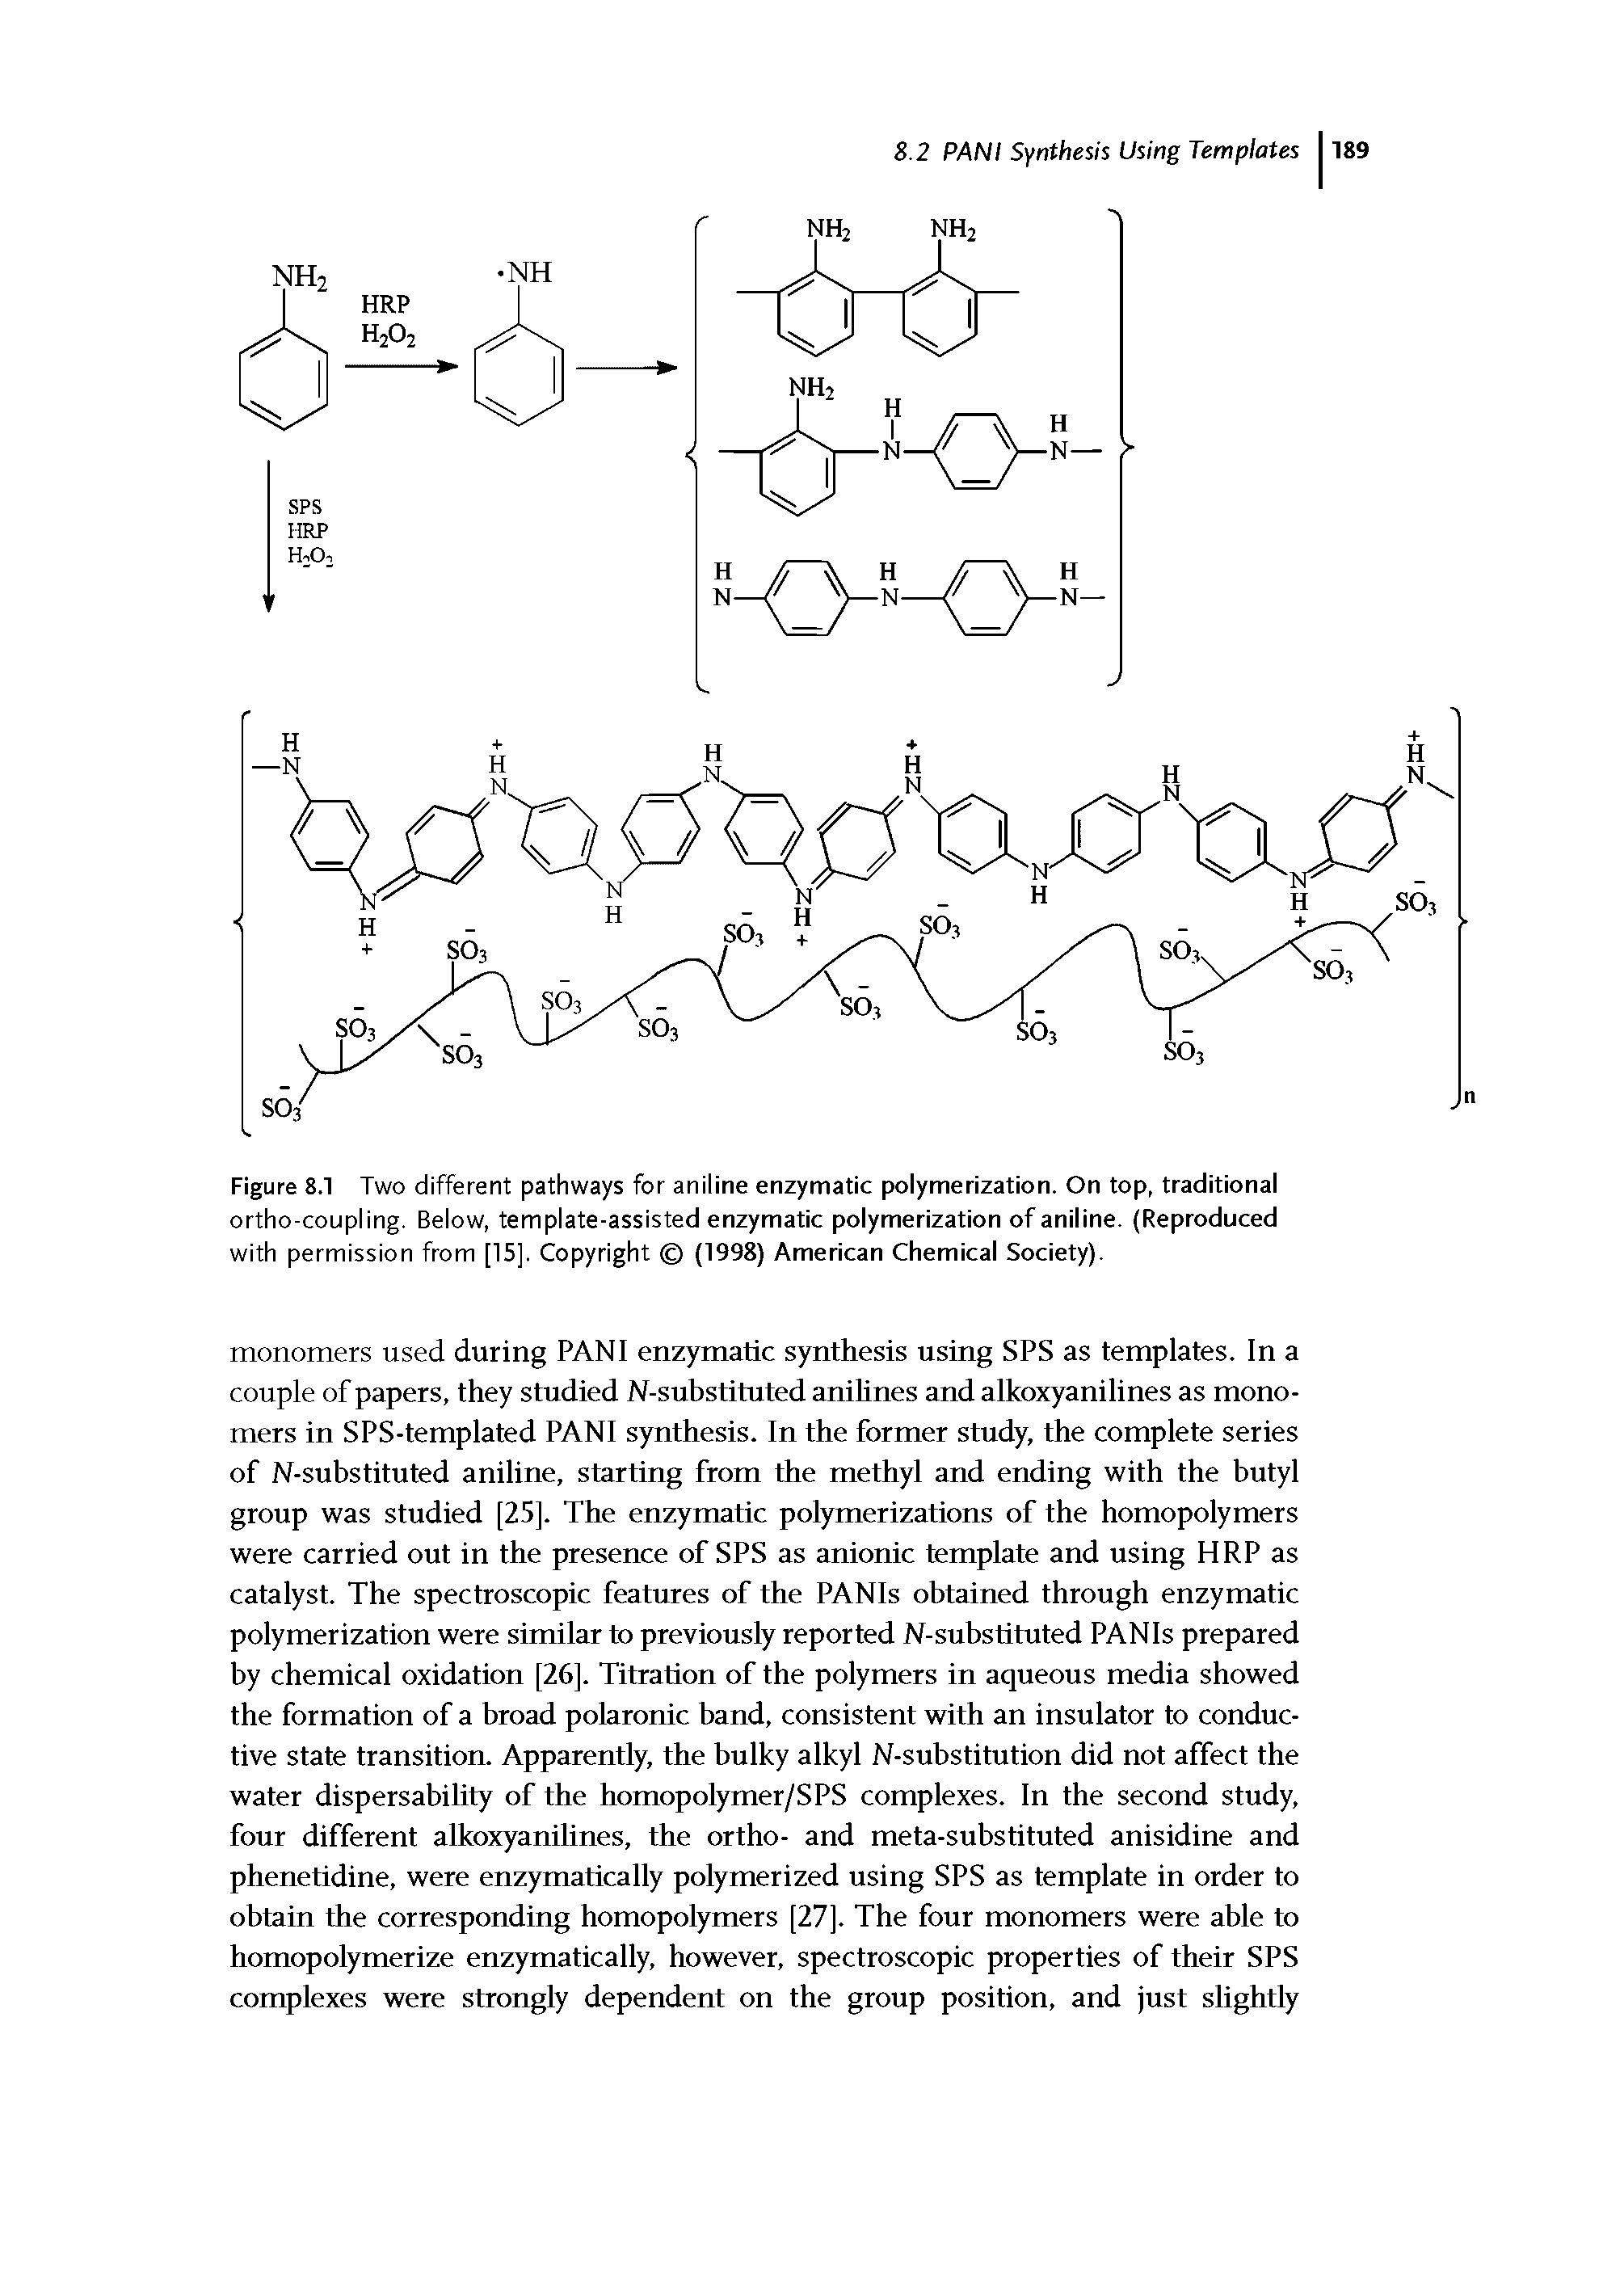 Figure 8.1 Two different pathways for aniline enzymatic polymerization. On top, traditional ortho-coupling. Below, template-assisted enzymatic polymerization of aniline. (Reproduced with permission from [15]. Copyright (1998) American Chemical Society).